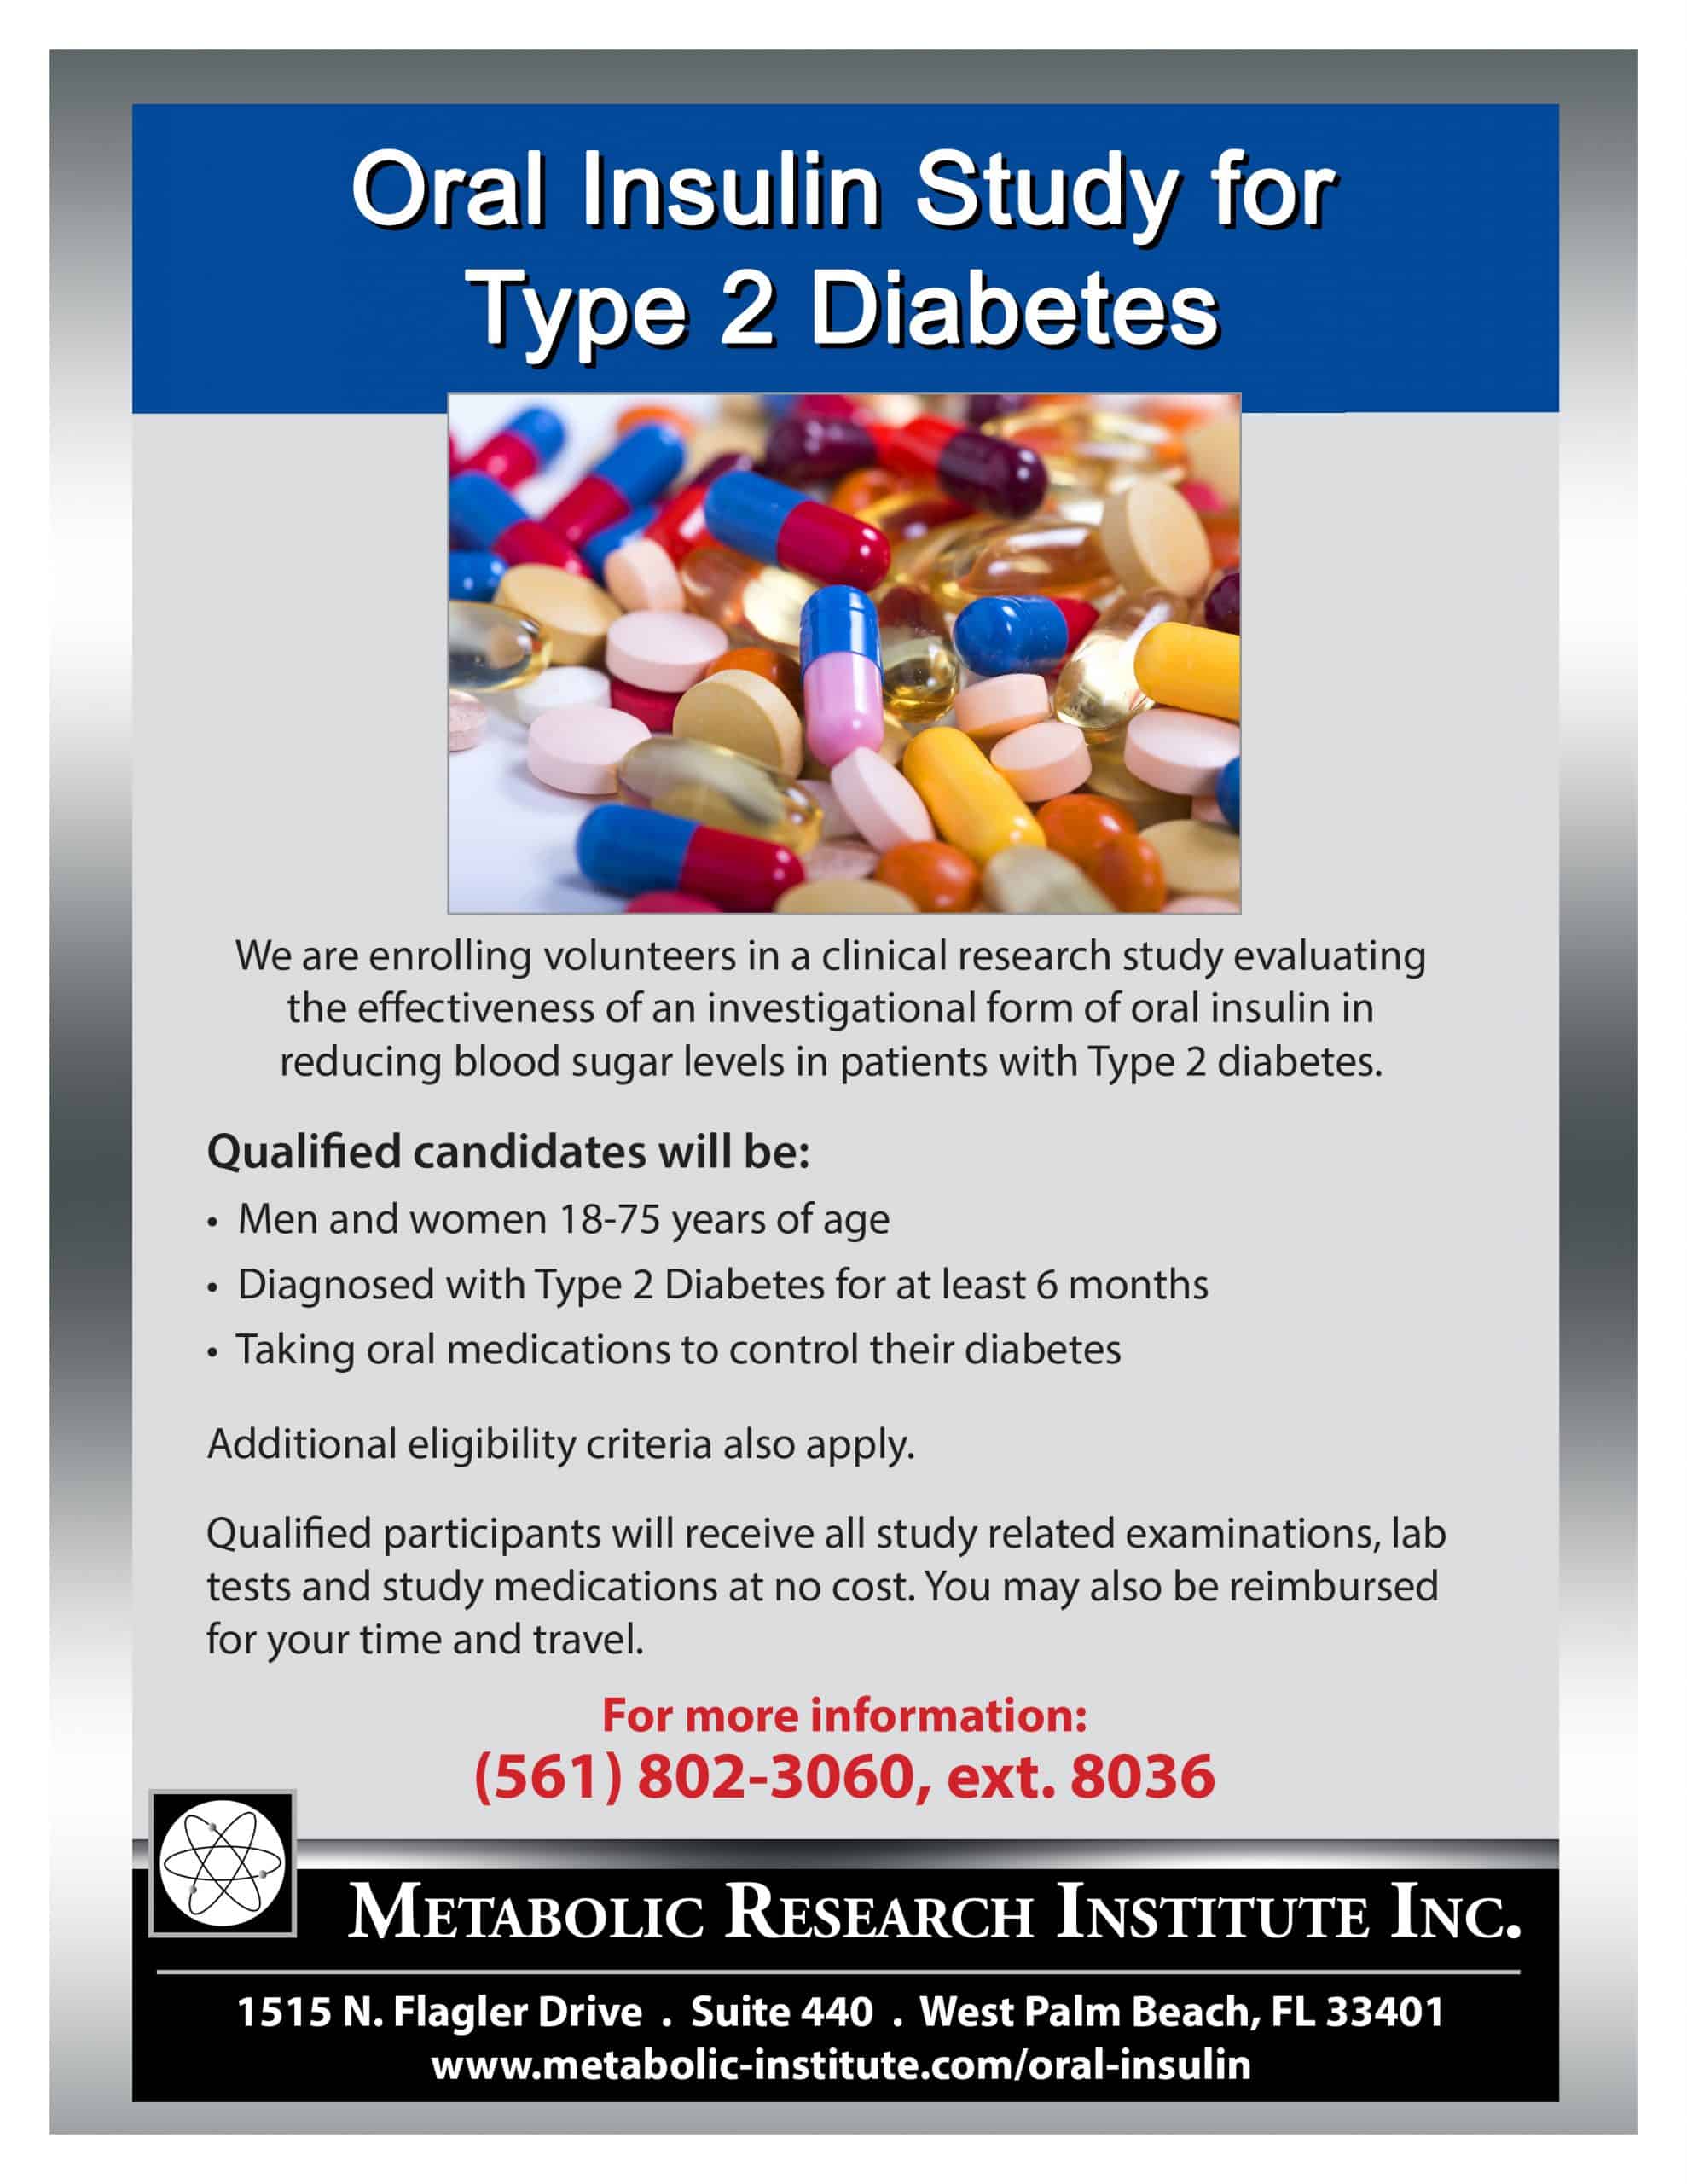 Oral Insulin for Type 2 Diabetes Study flyer